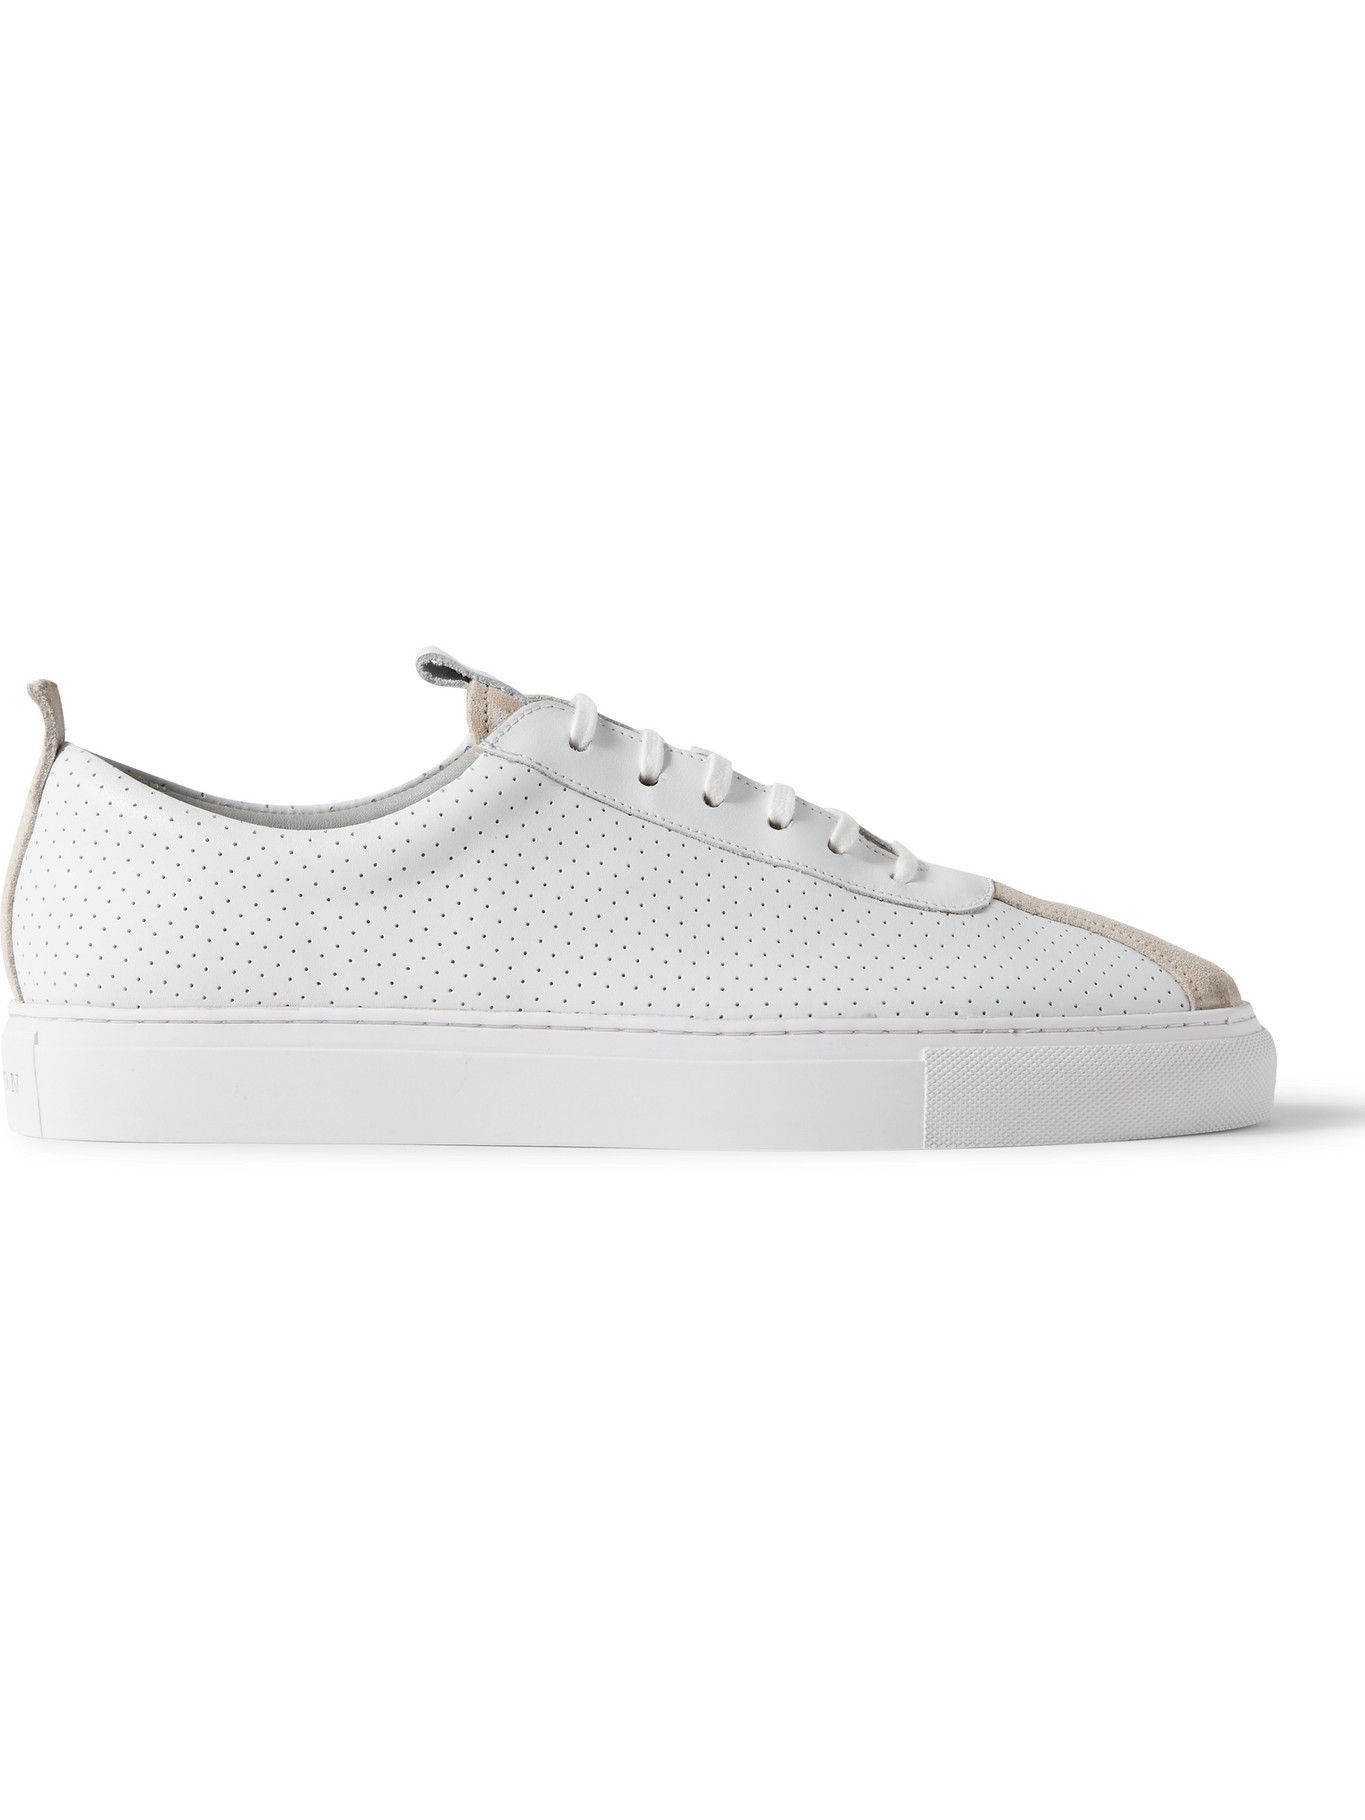 Grenson - Suede-Trimmed Leather Sneakers White Grenson